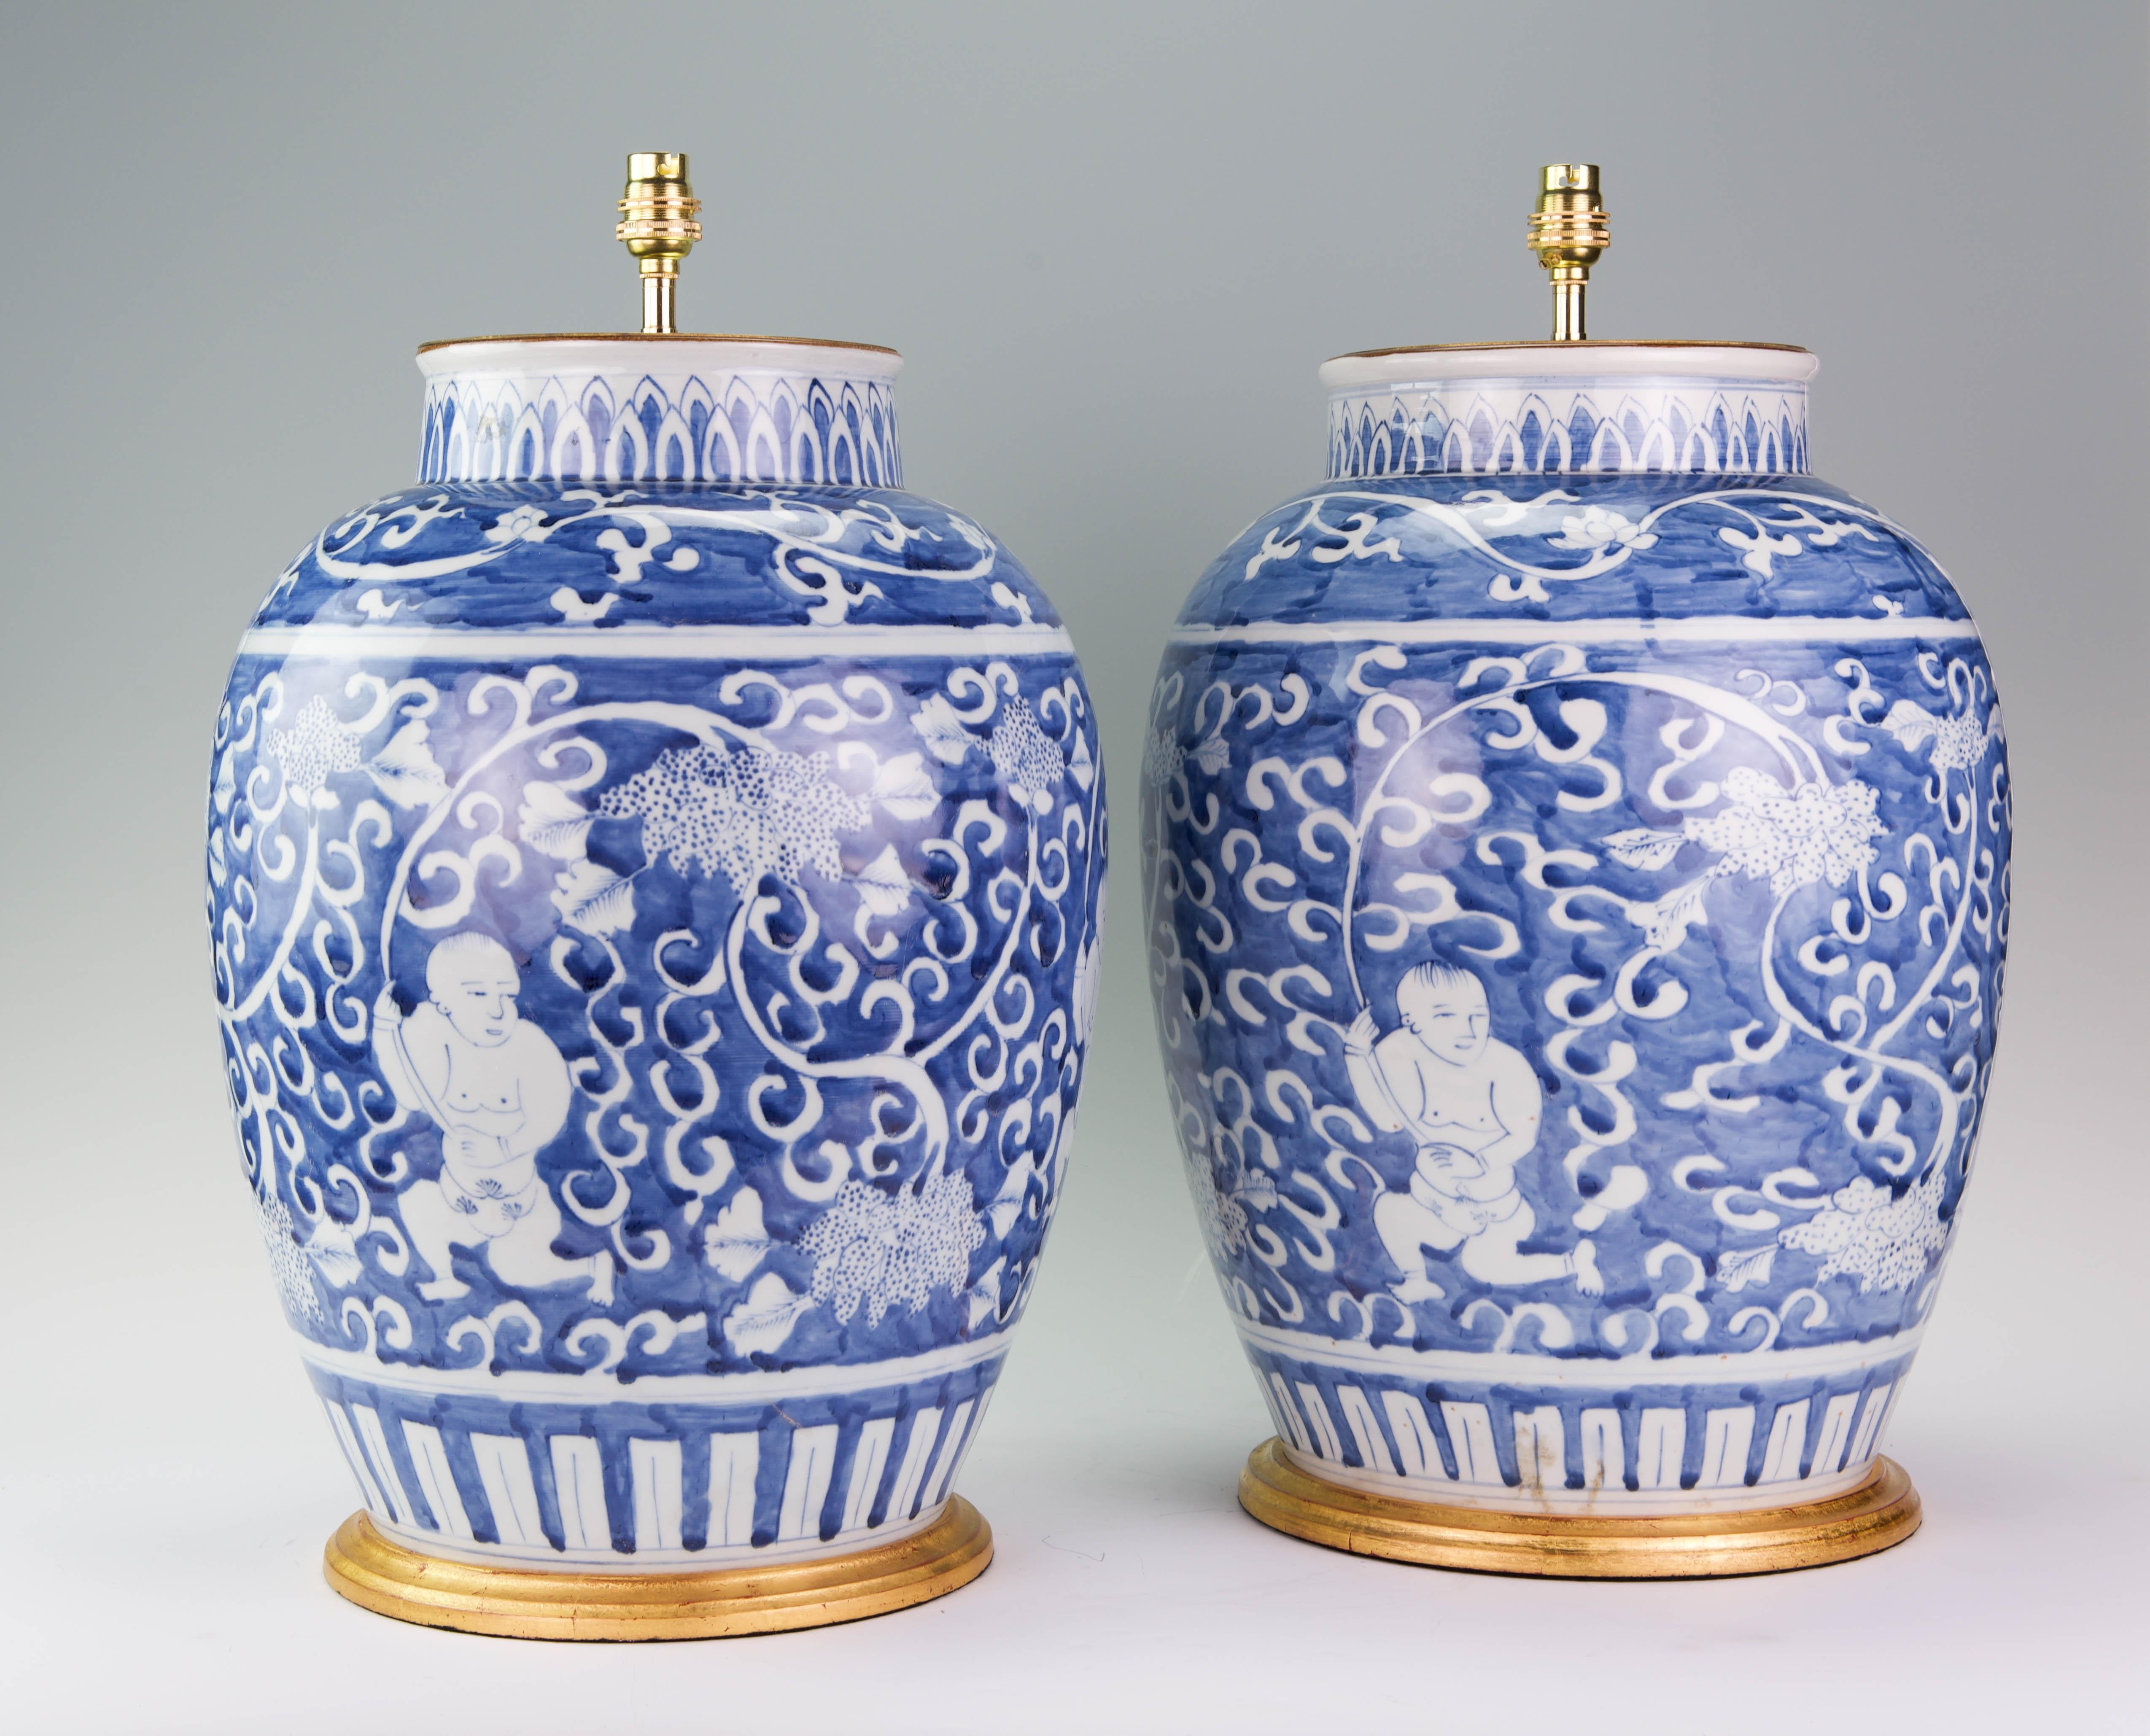 A fine pair of large Chinese blue and white Kangxi style baluster vases, beautifully painted with Chinese figures in a stylised garden landscape, now mounted as table lamps with hand gilded tuned bases.

Height of vases: 18 in (46 cm) including